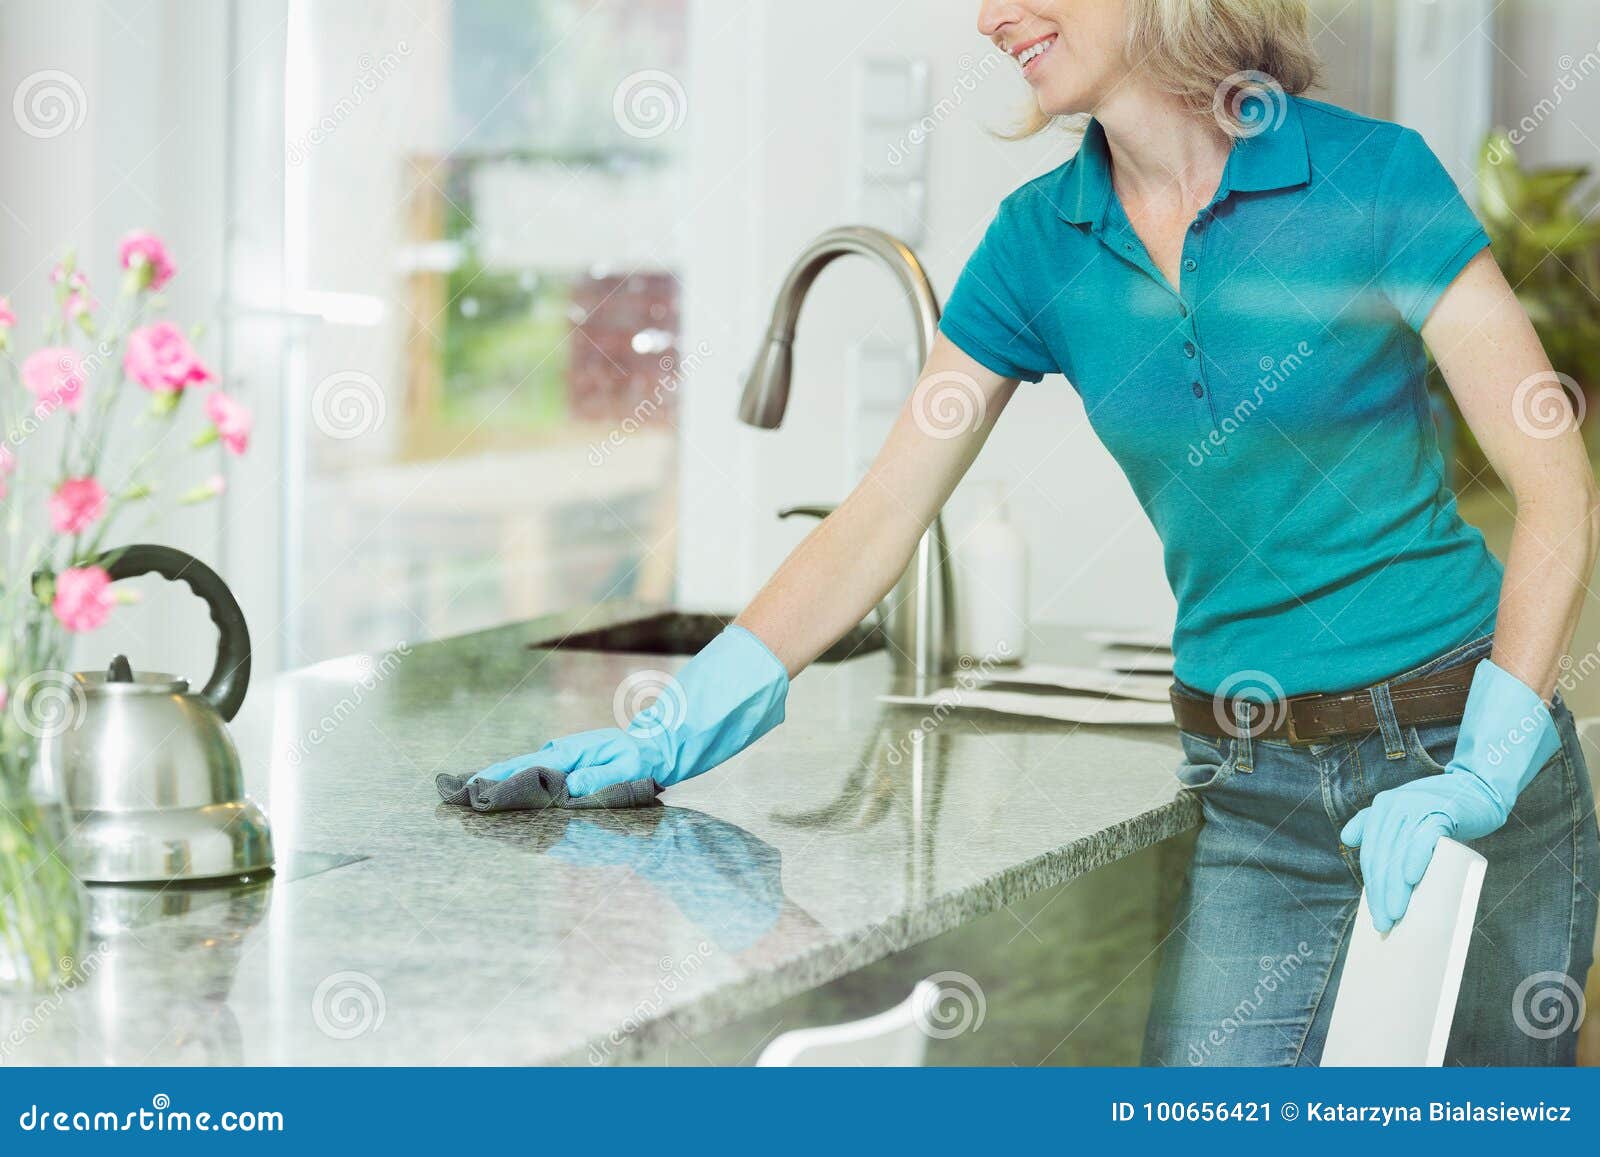 Woman Wiping Down Kitchen Countertop Stock Image Image Of Help